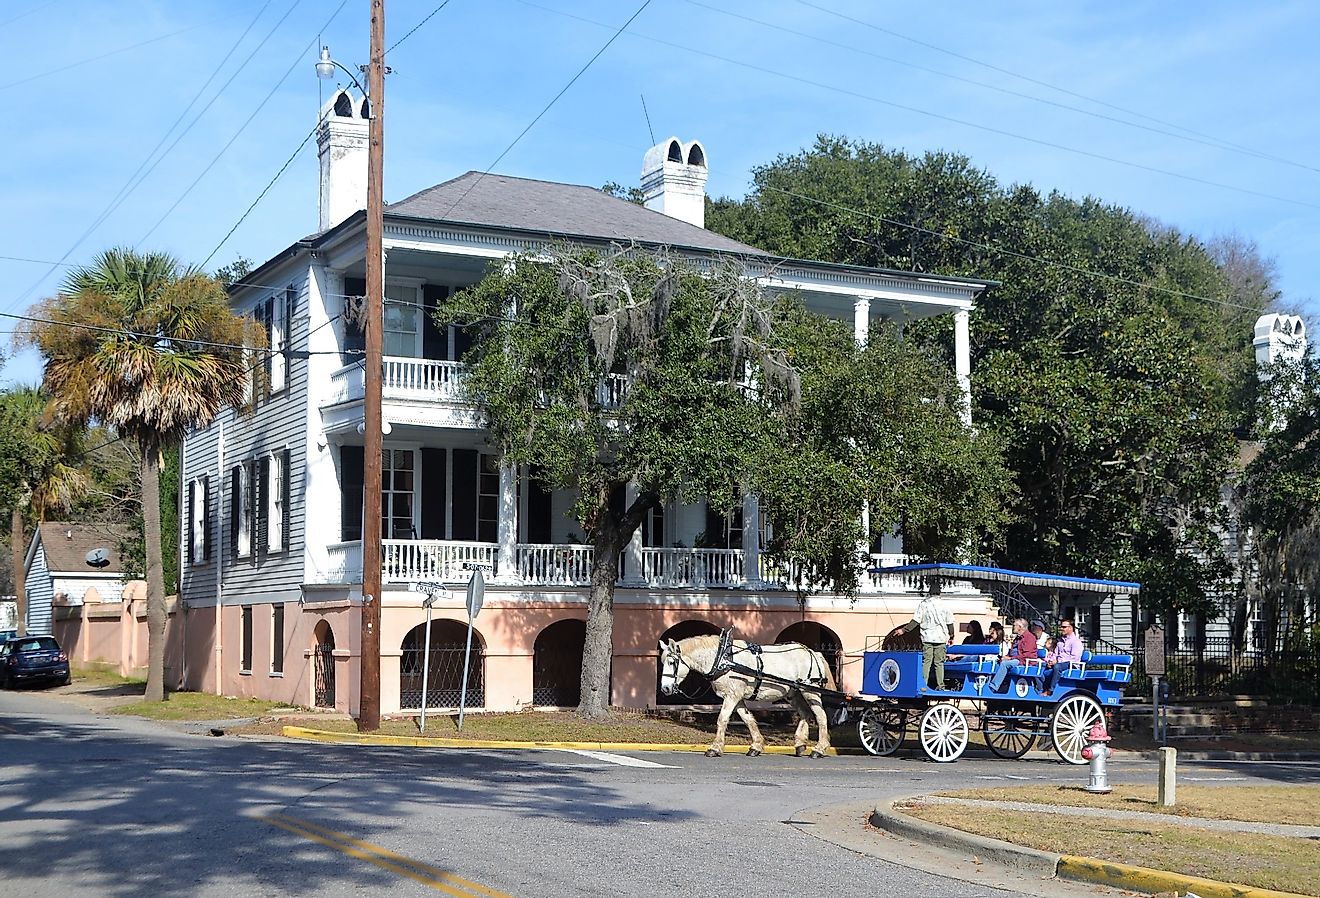 Horse and buggy tour in front of a beautiful antebellum house in Beaufort, South Carolina.